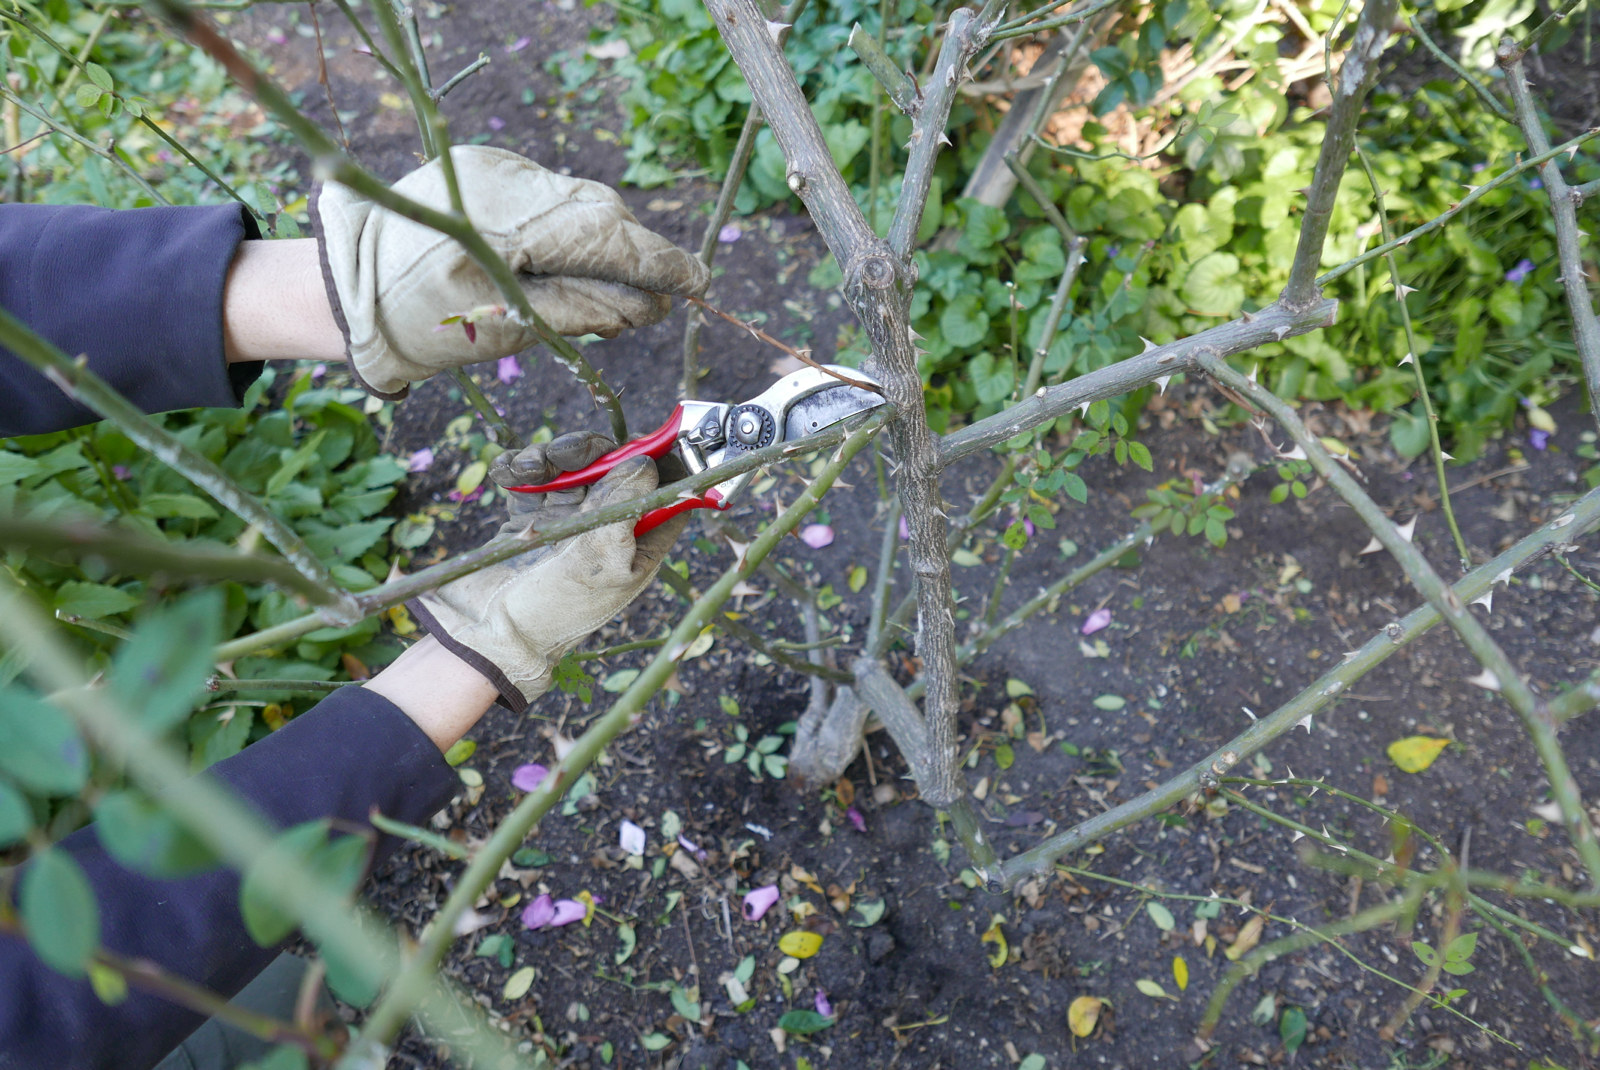 Sharp clean secateurs remove deadwood from a rose at Vaucluse House.